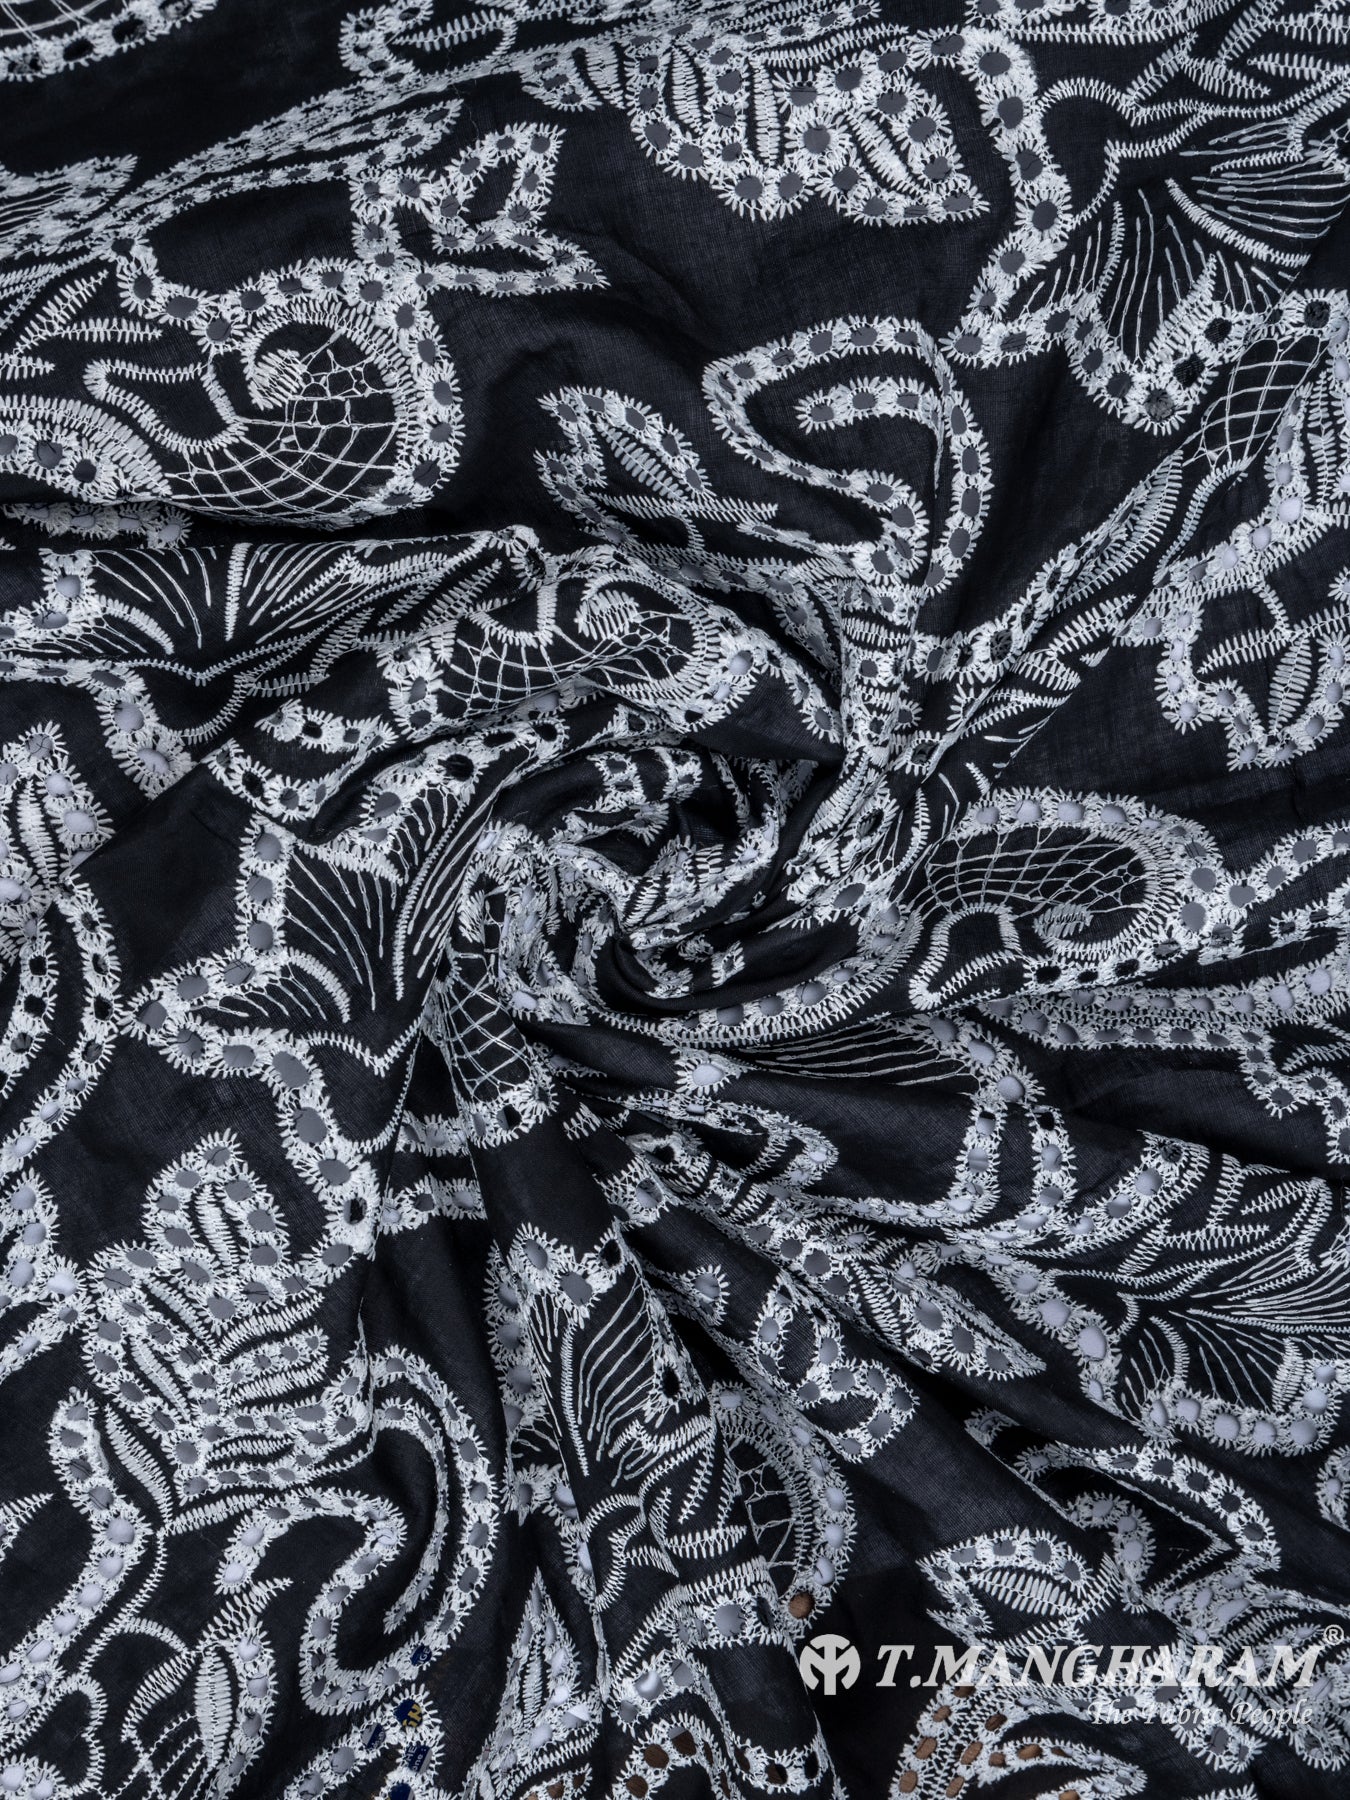 Black Cotton Embroidery Fabric - EC6744 view-1